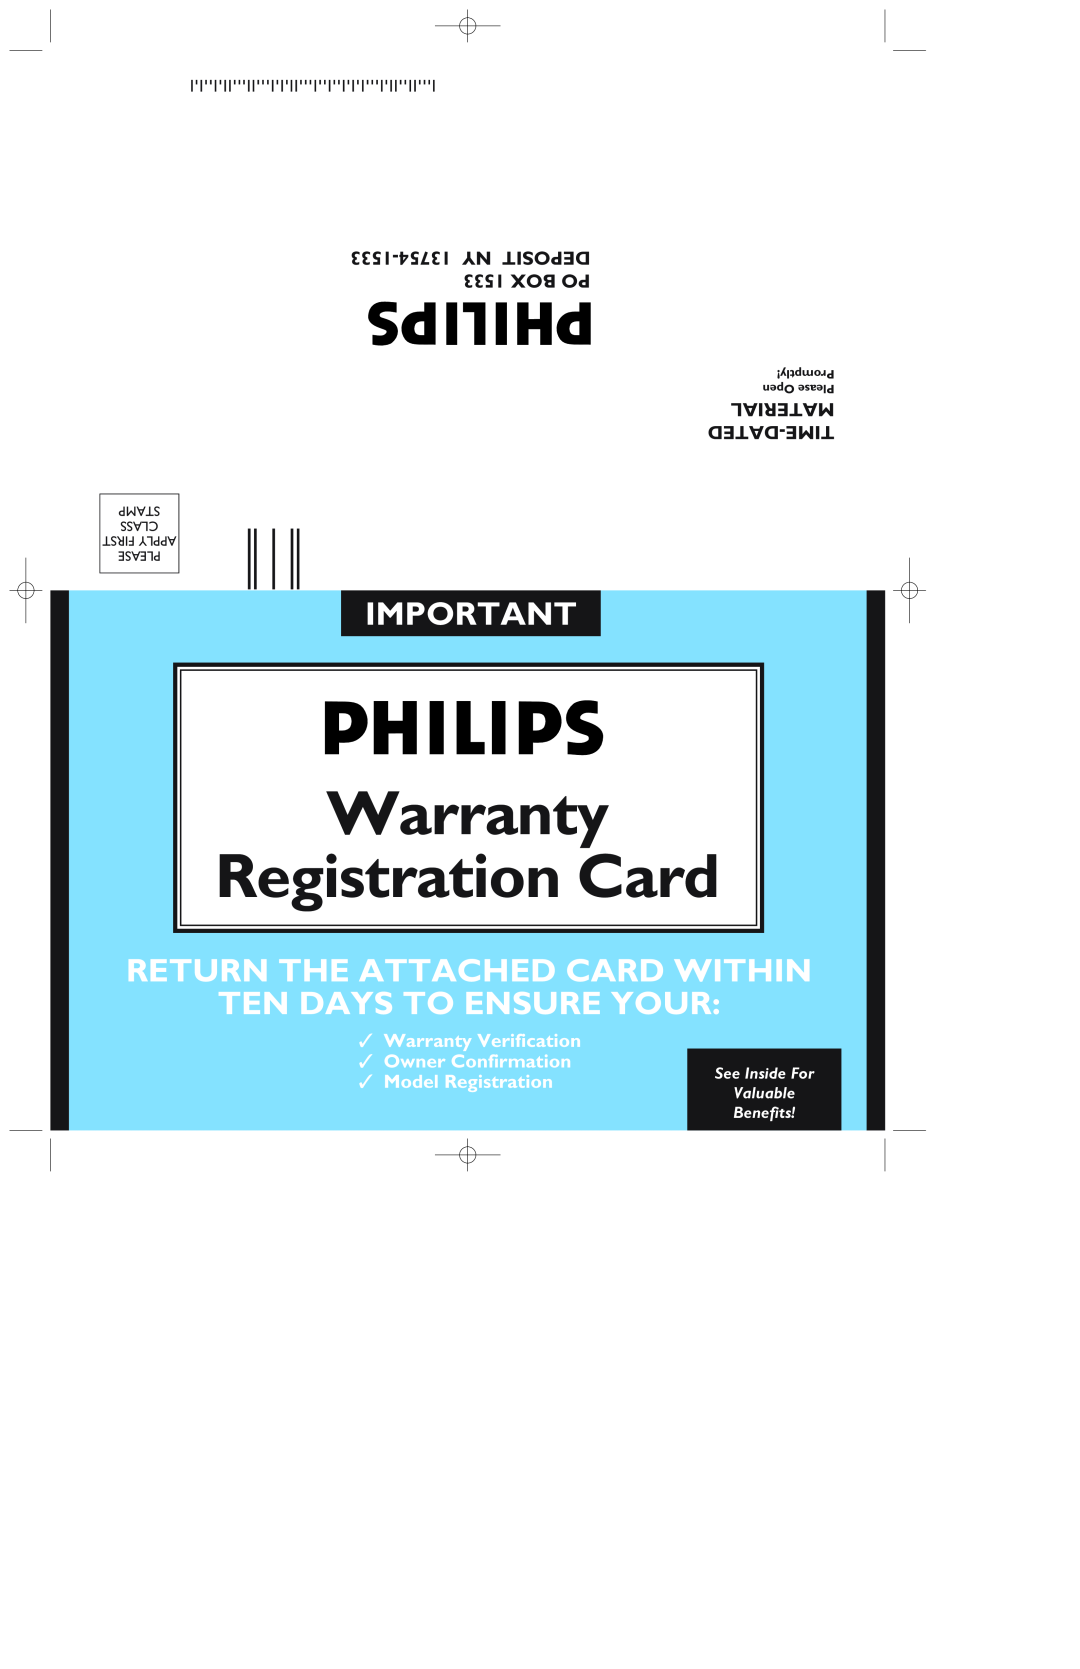 Philips 109F7 Ny Deposit, Box Po, Material, Dated-Time, Warranty, Registration Card, 1375415338, Stamp, Class, Please 